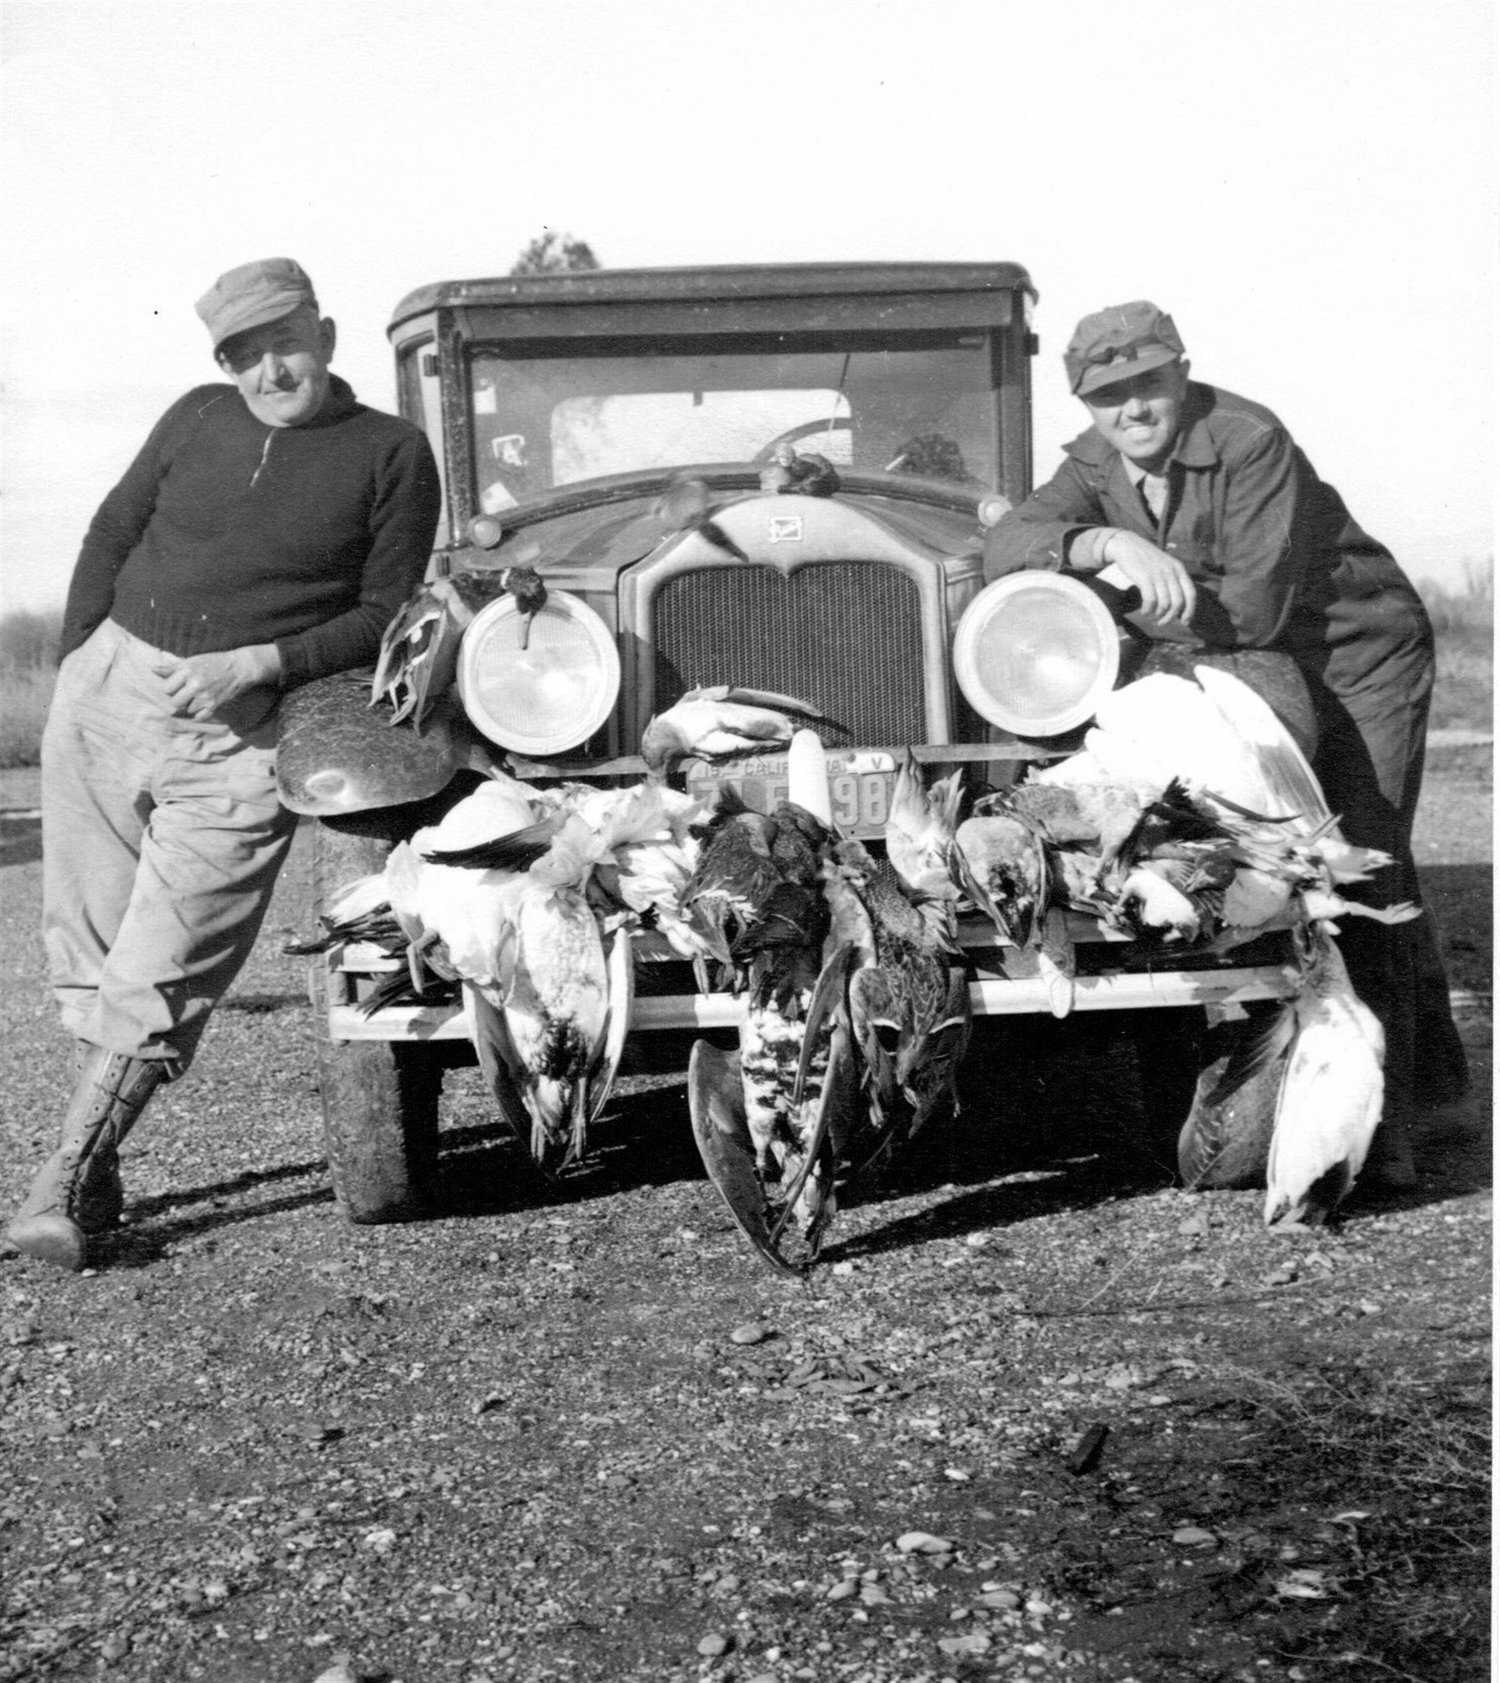 A historical photograph of marksmen returning with their haul of birds on the front of their primitive car.